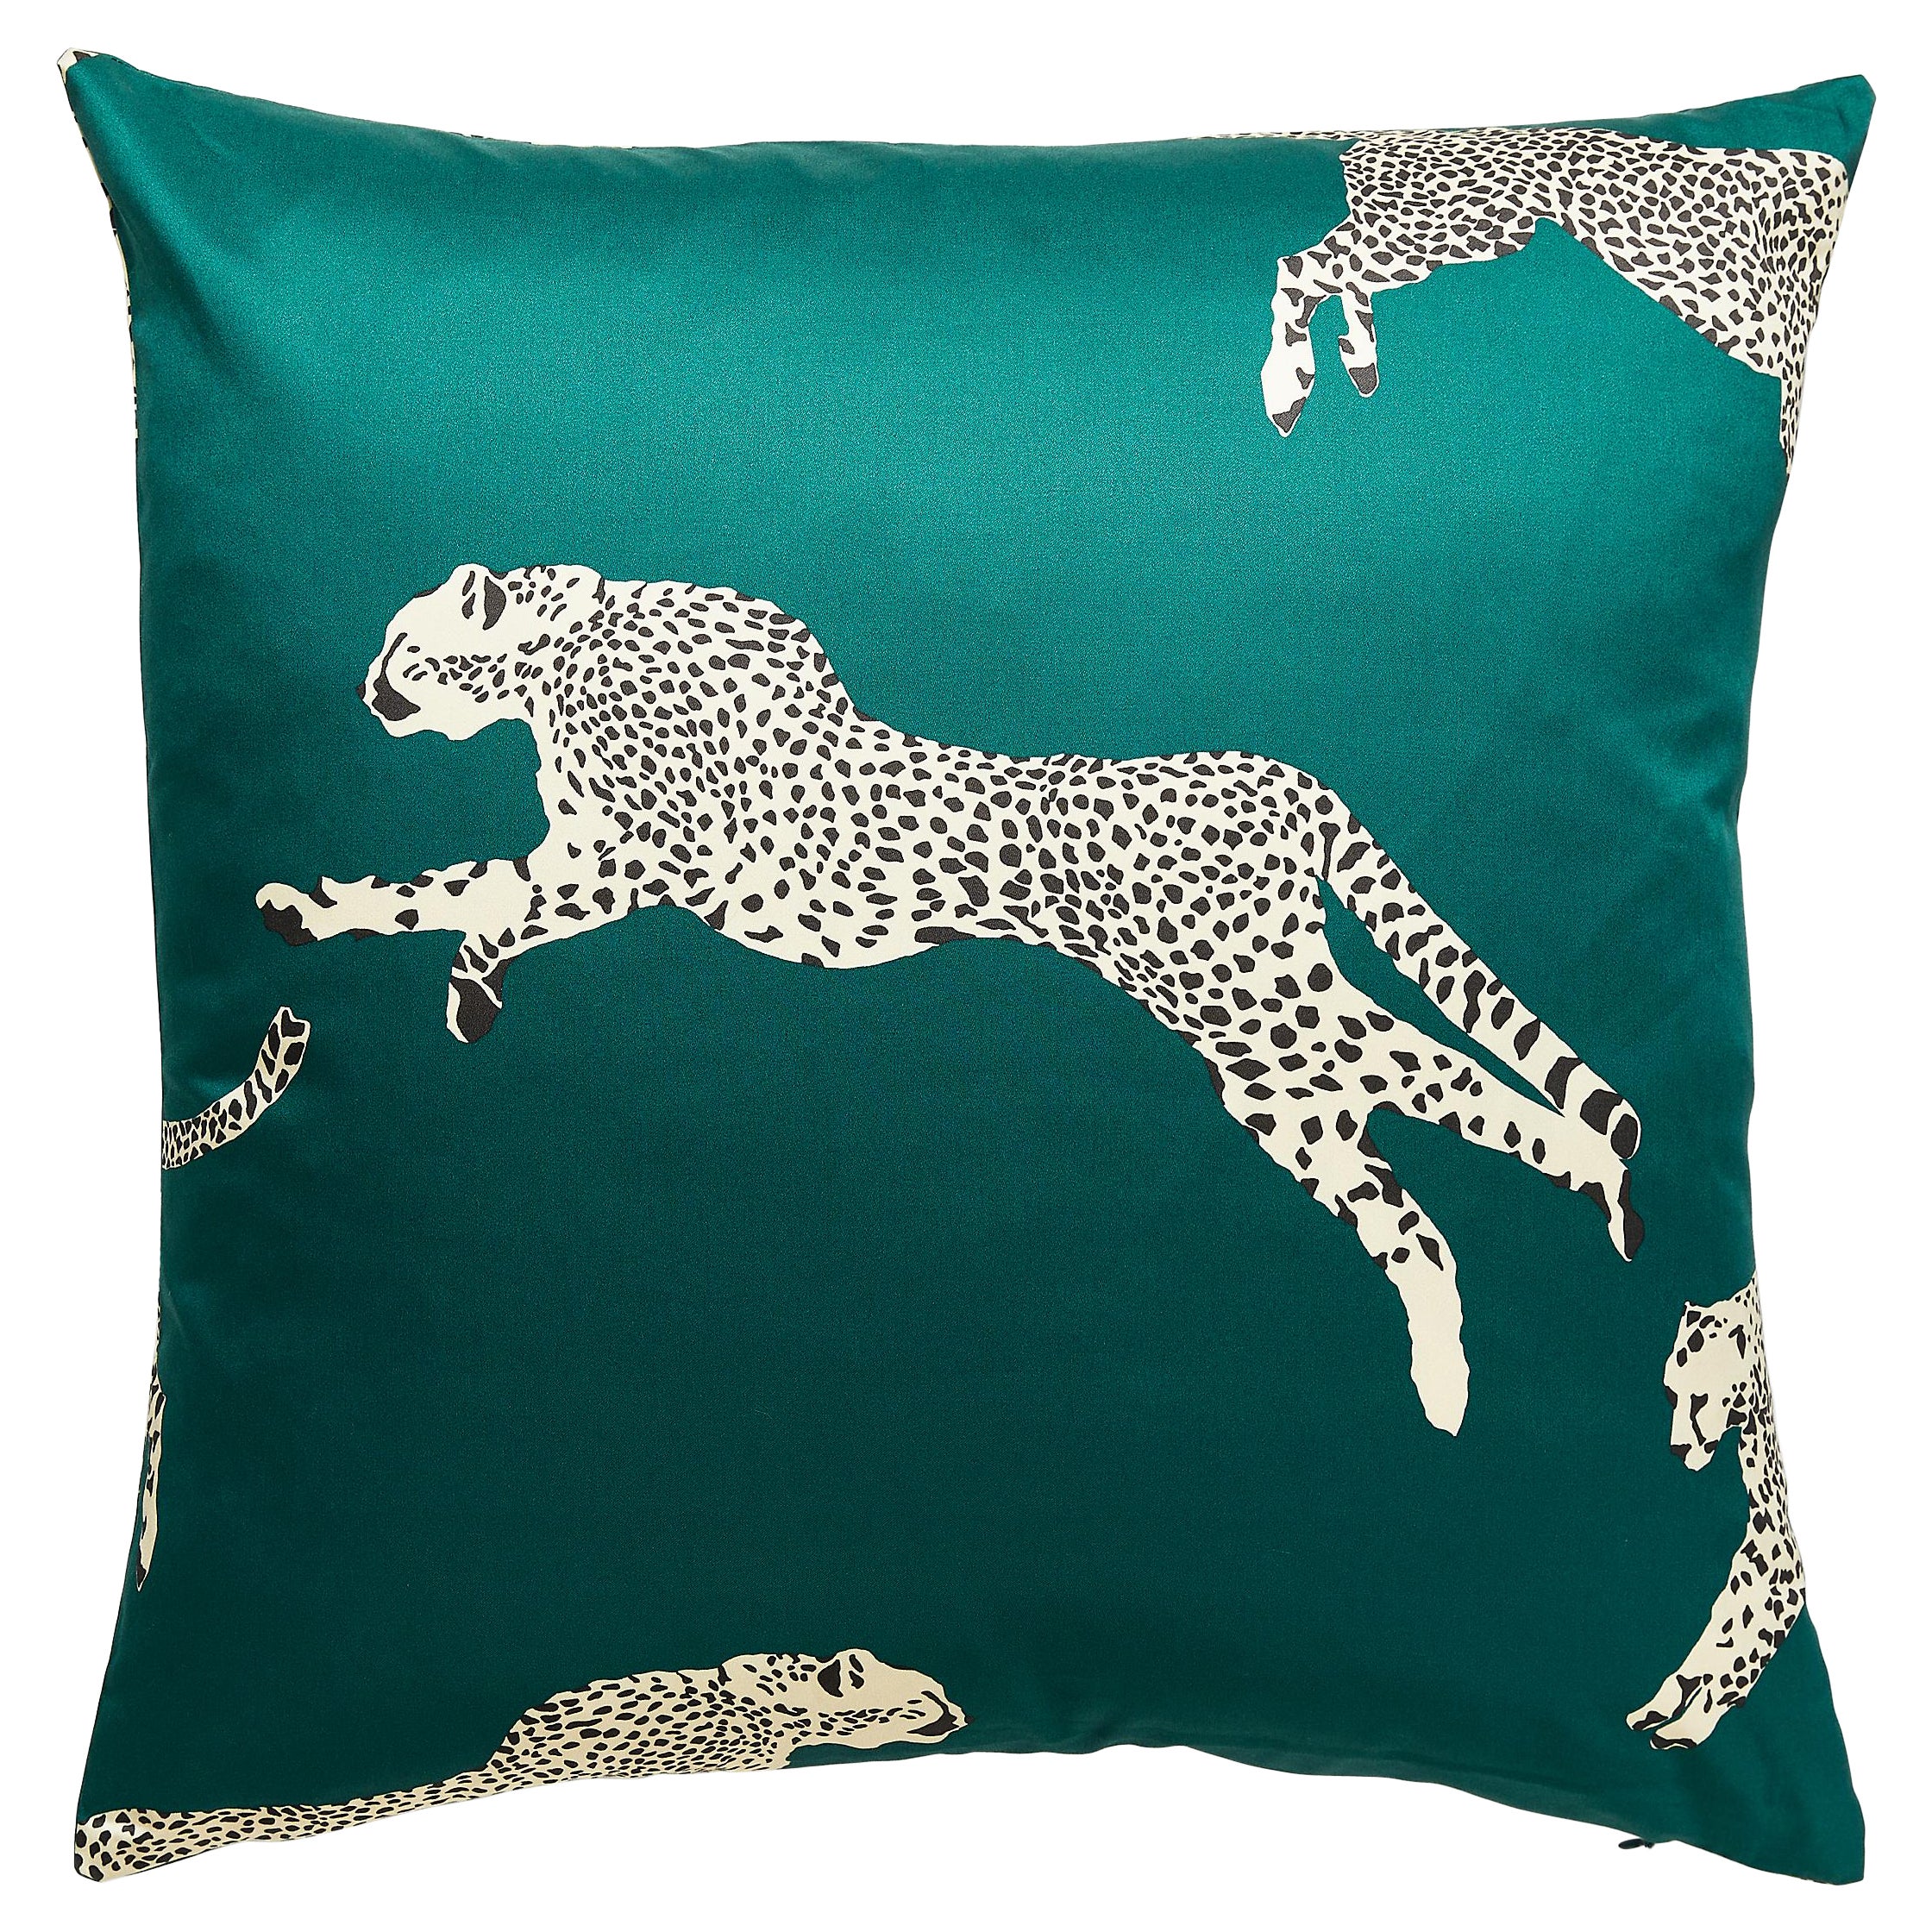 Leaping Cheetah Pillow For Sale